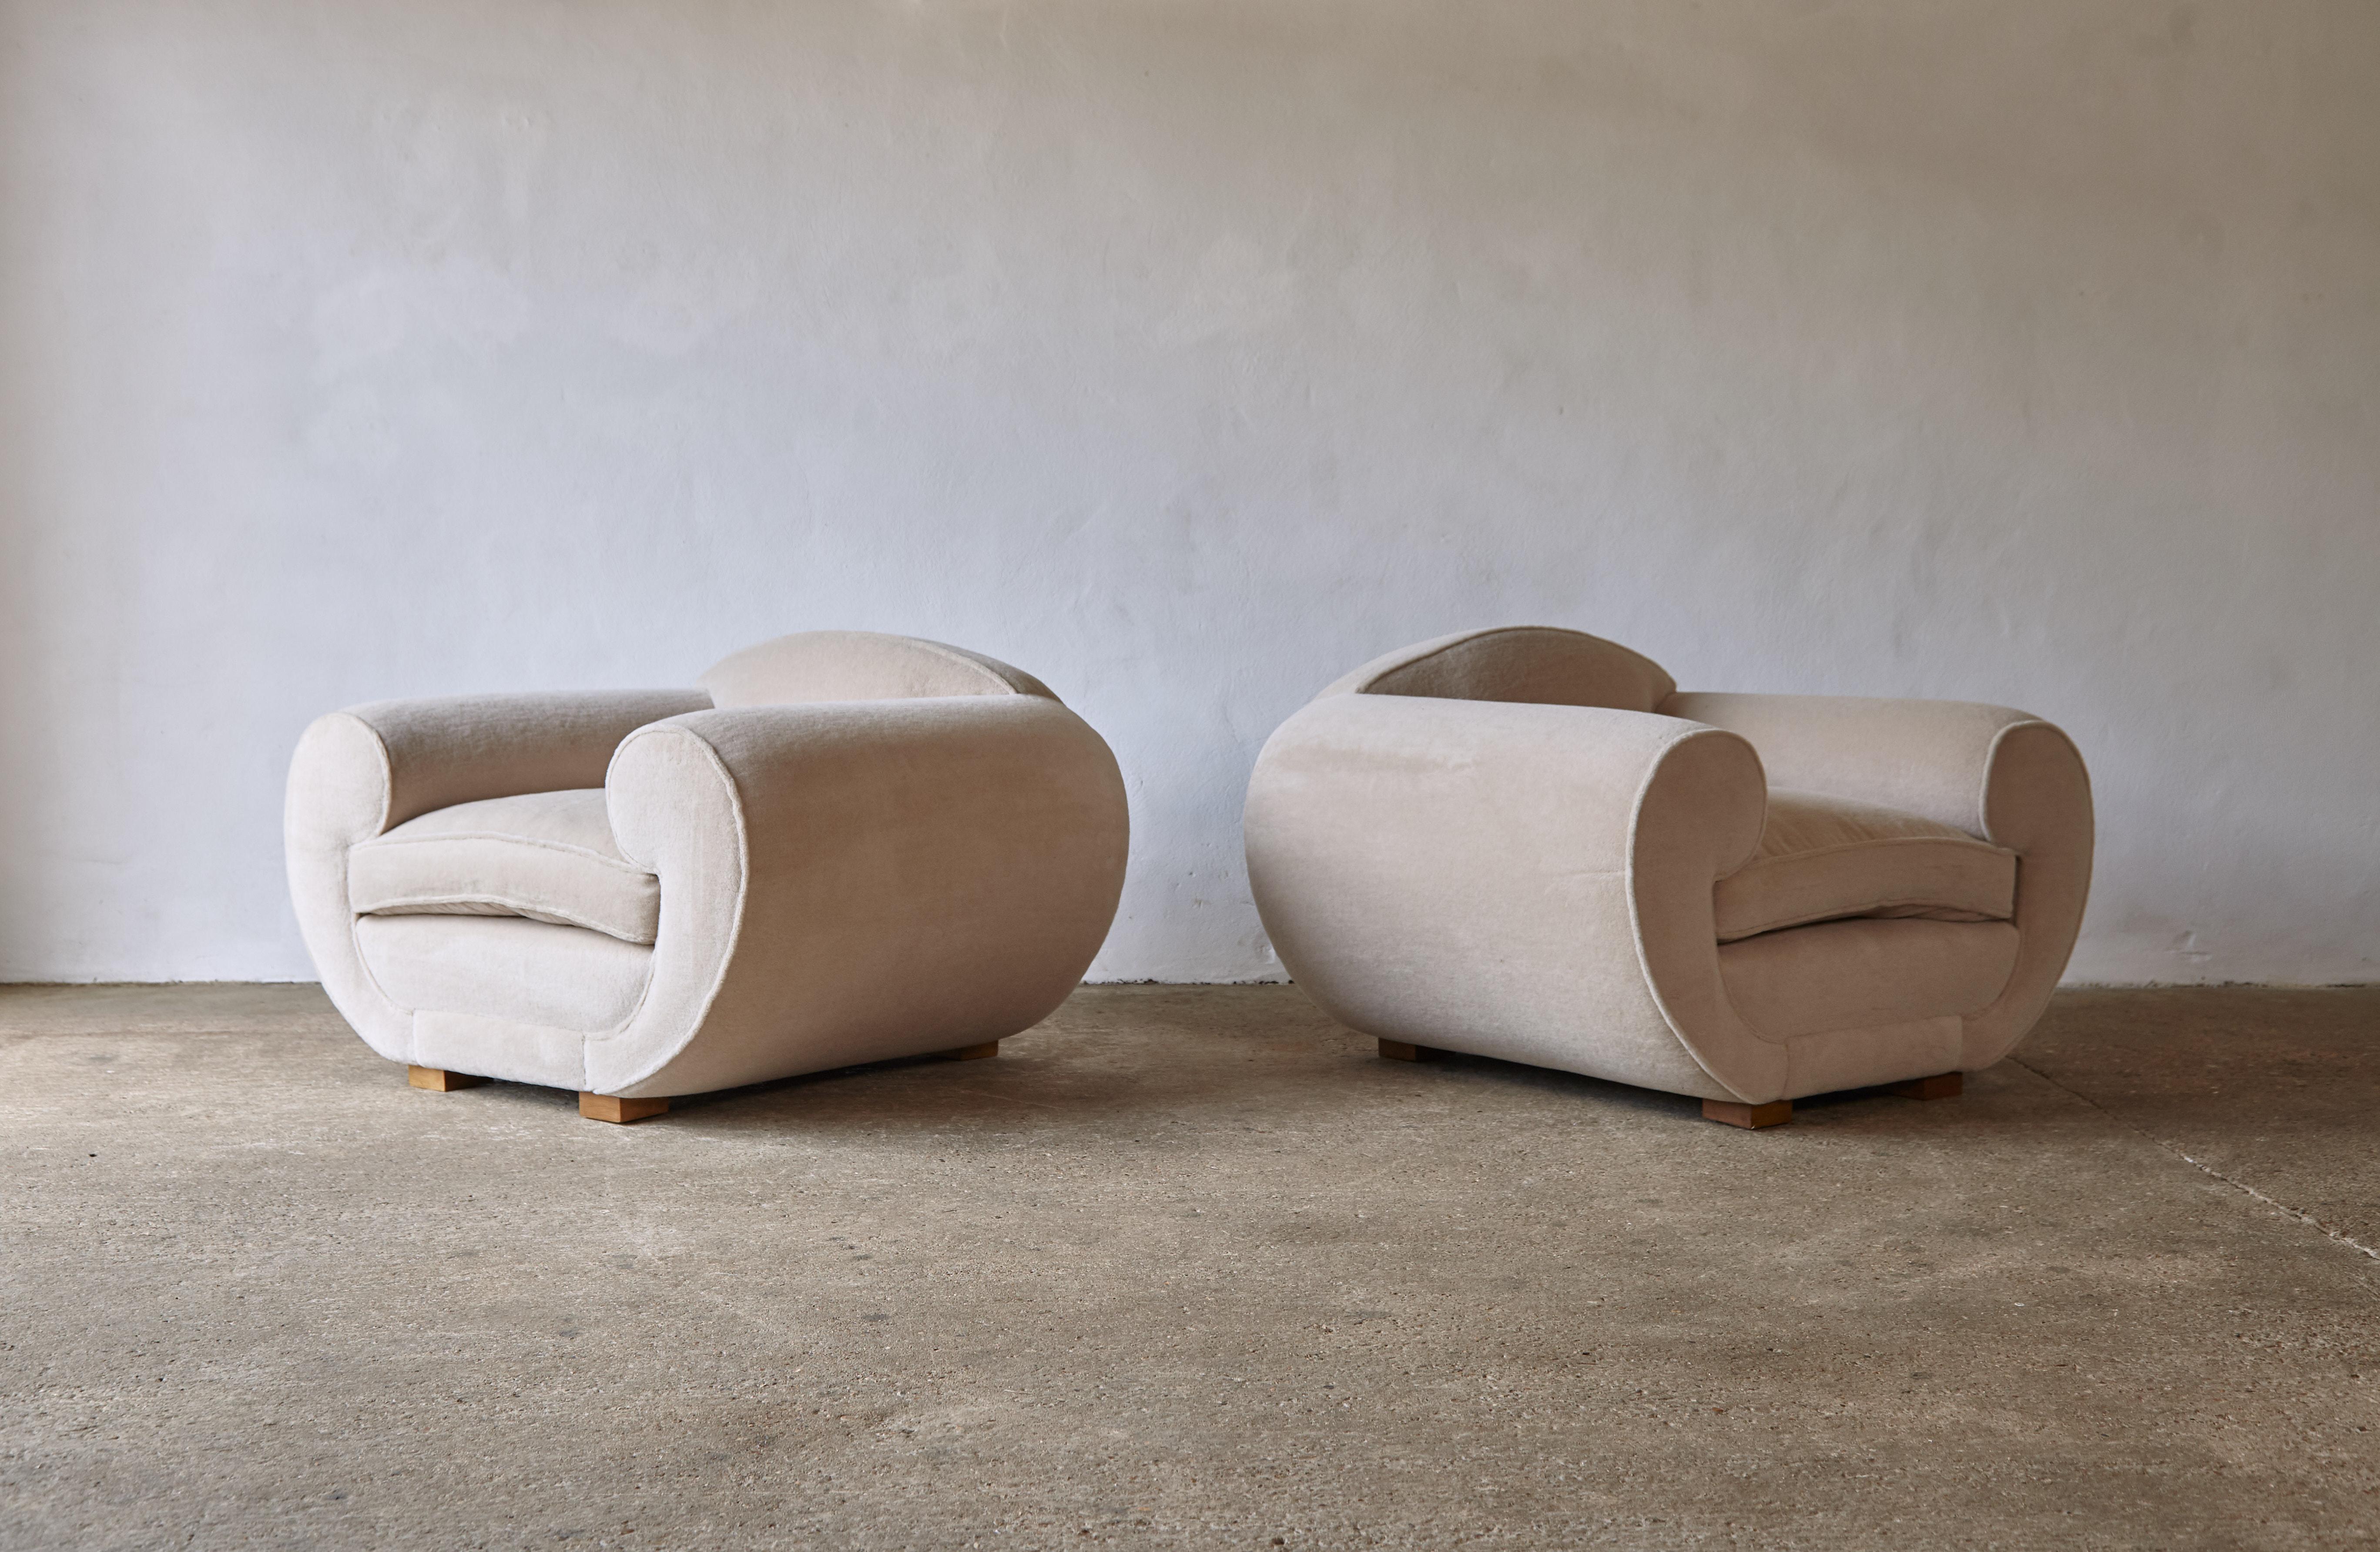 Superb pair of Jean Royere / Maison Gouffe style armchairs, upholstered in pure Alpaca. High quality hand-made beech frames and newly upholstered in a beige / stone premium 100% alpaca fabric. Fast shipping worldwide.



